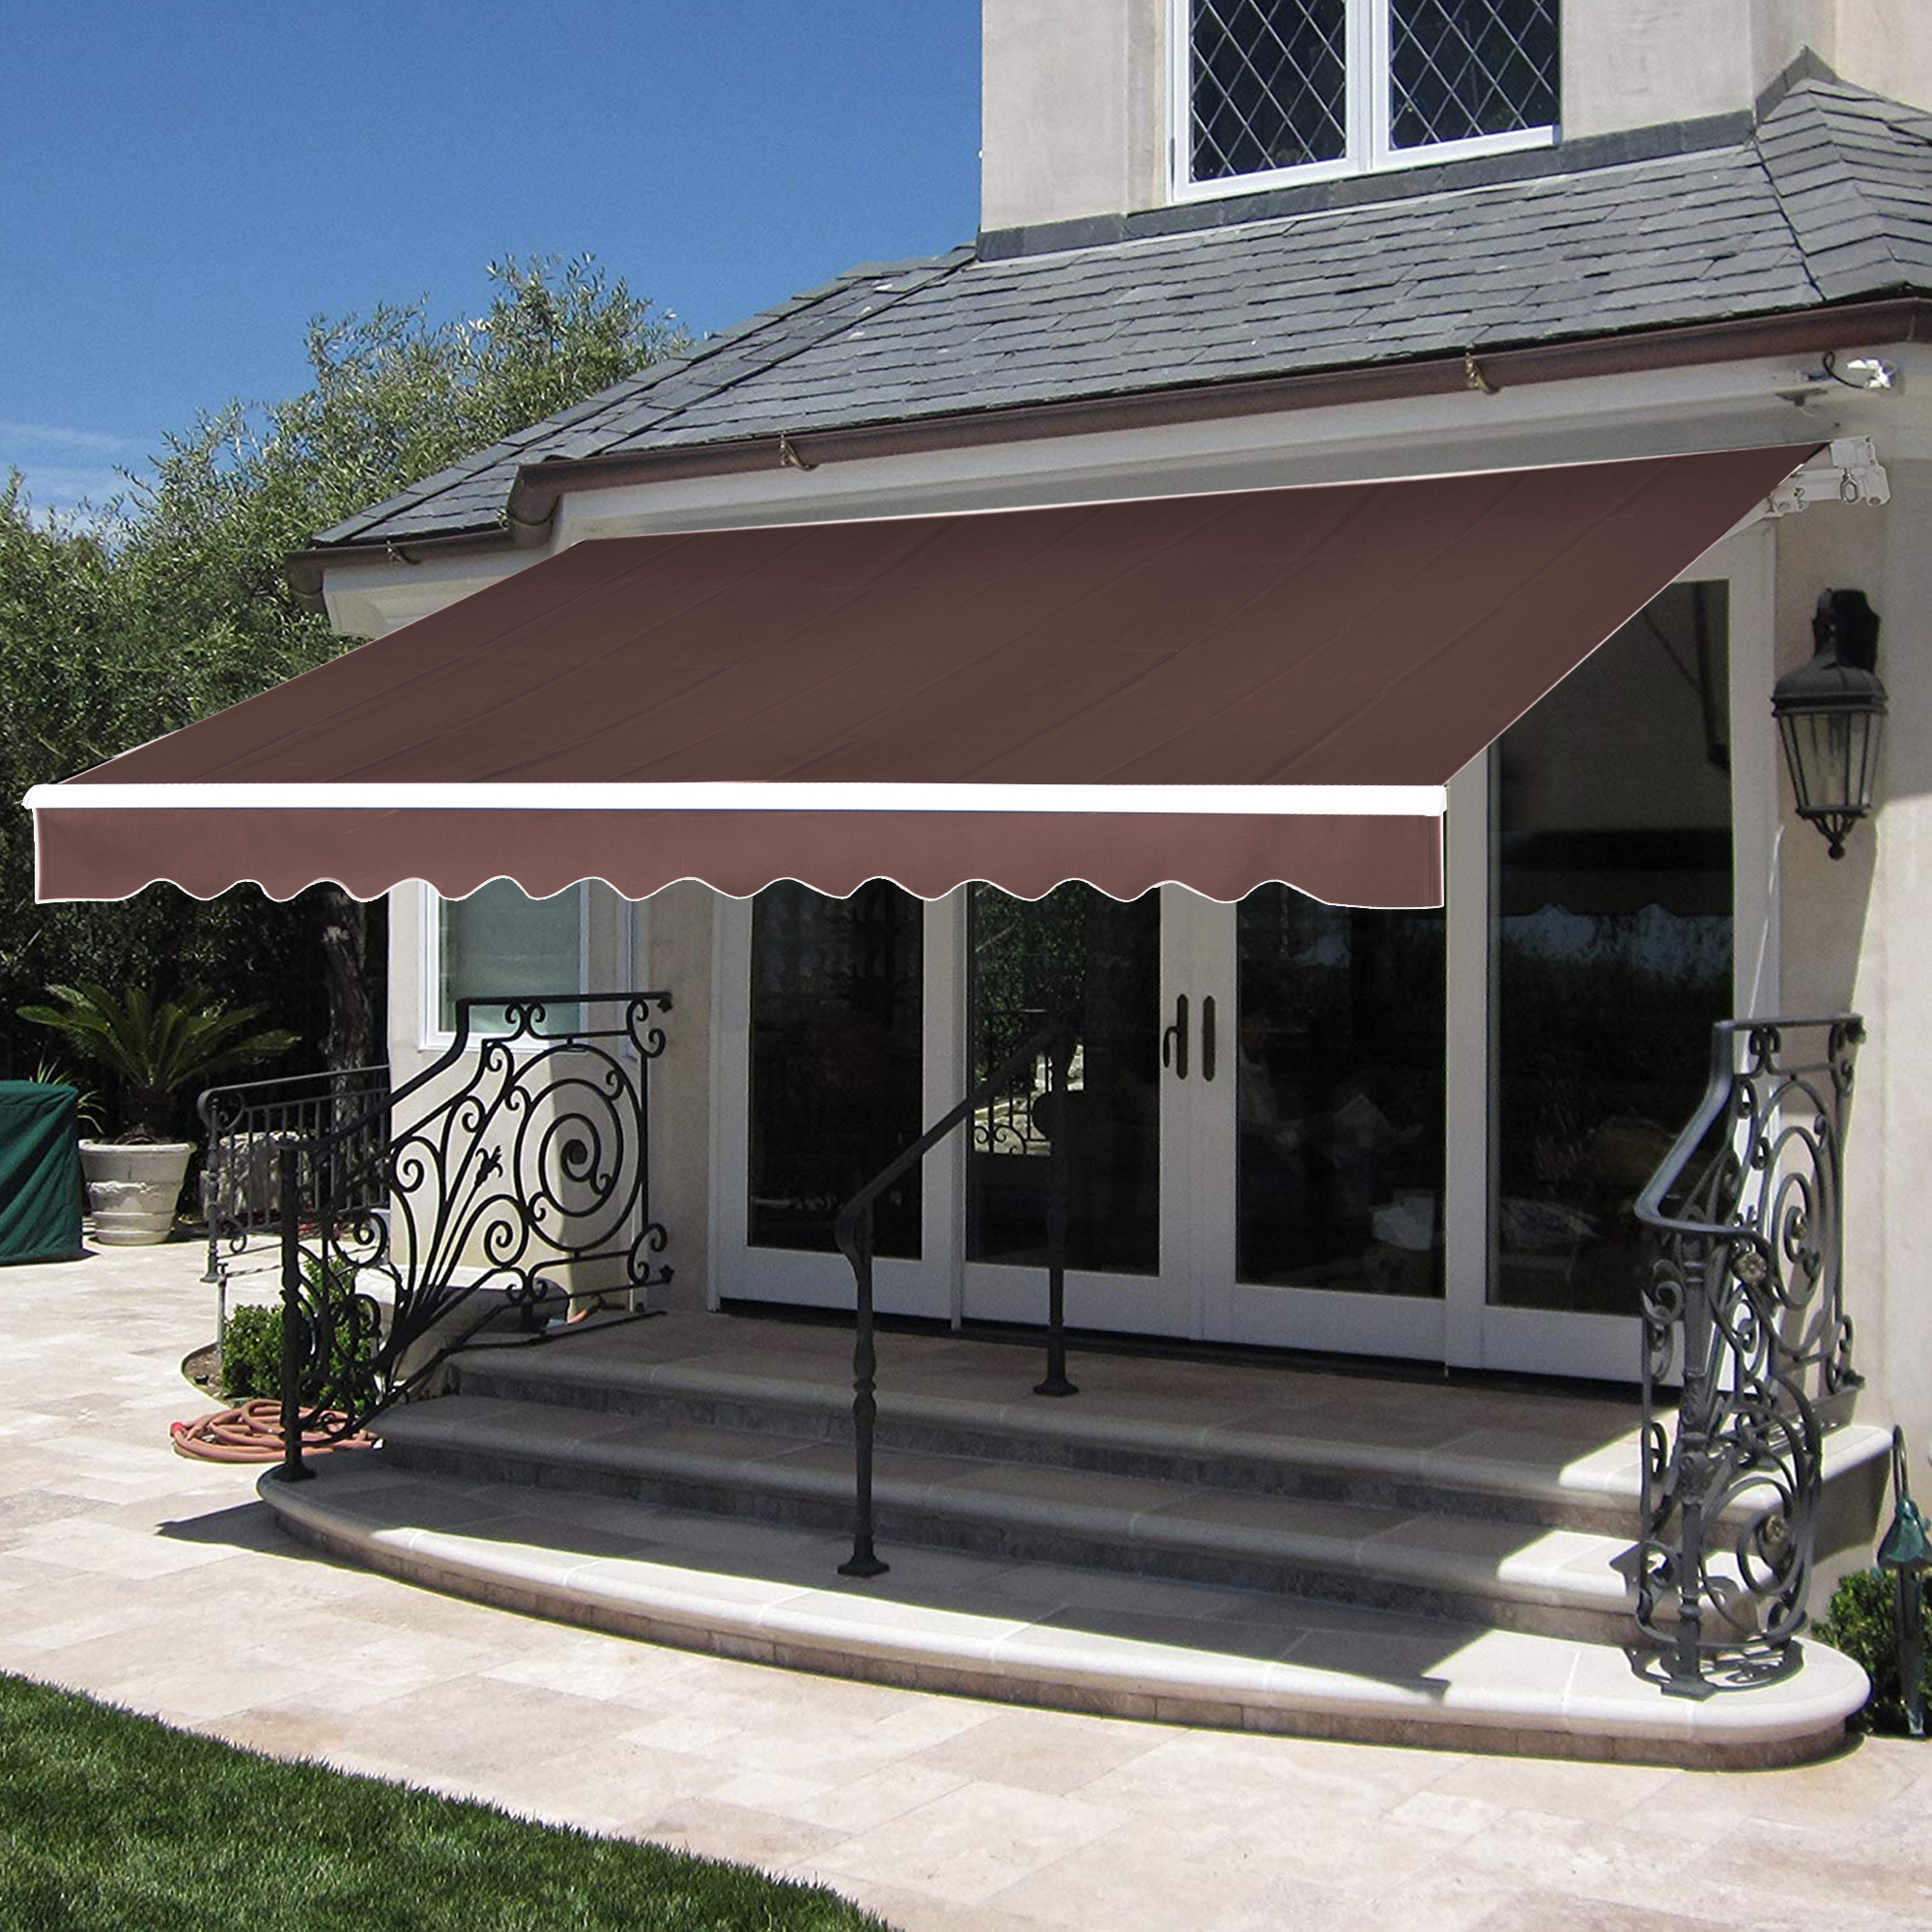 MCombo 10x8 FT Manual Retractable Patio Window Awning Commercial Grade 280G Polyester Sunshade Shelter Outdoor Canopy Aluminum Frame